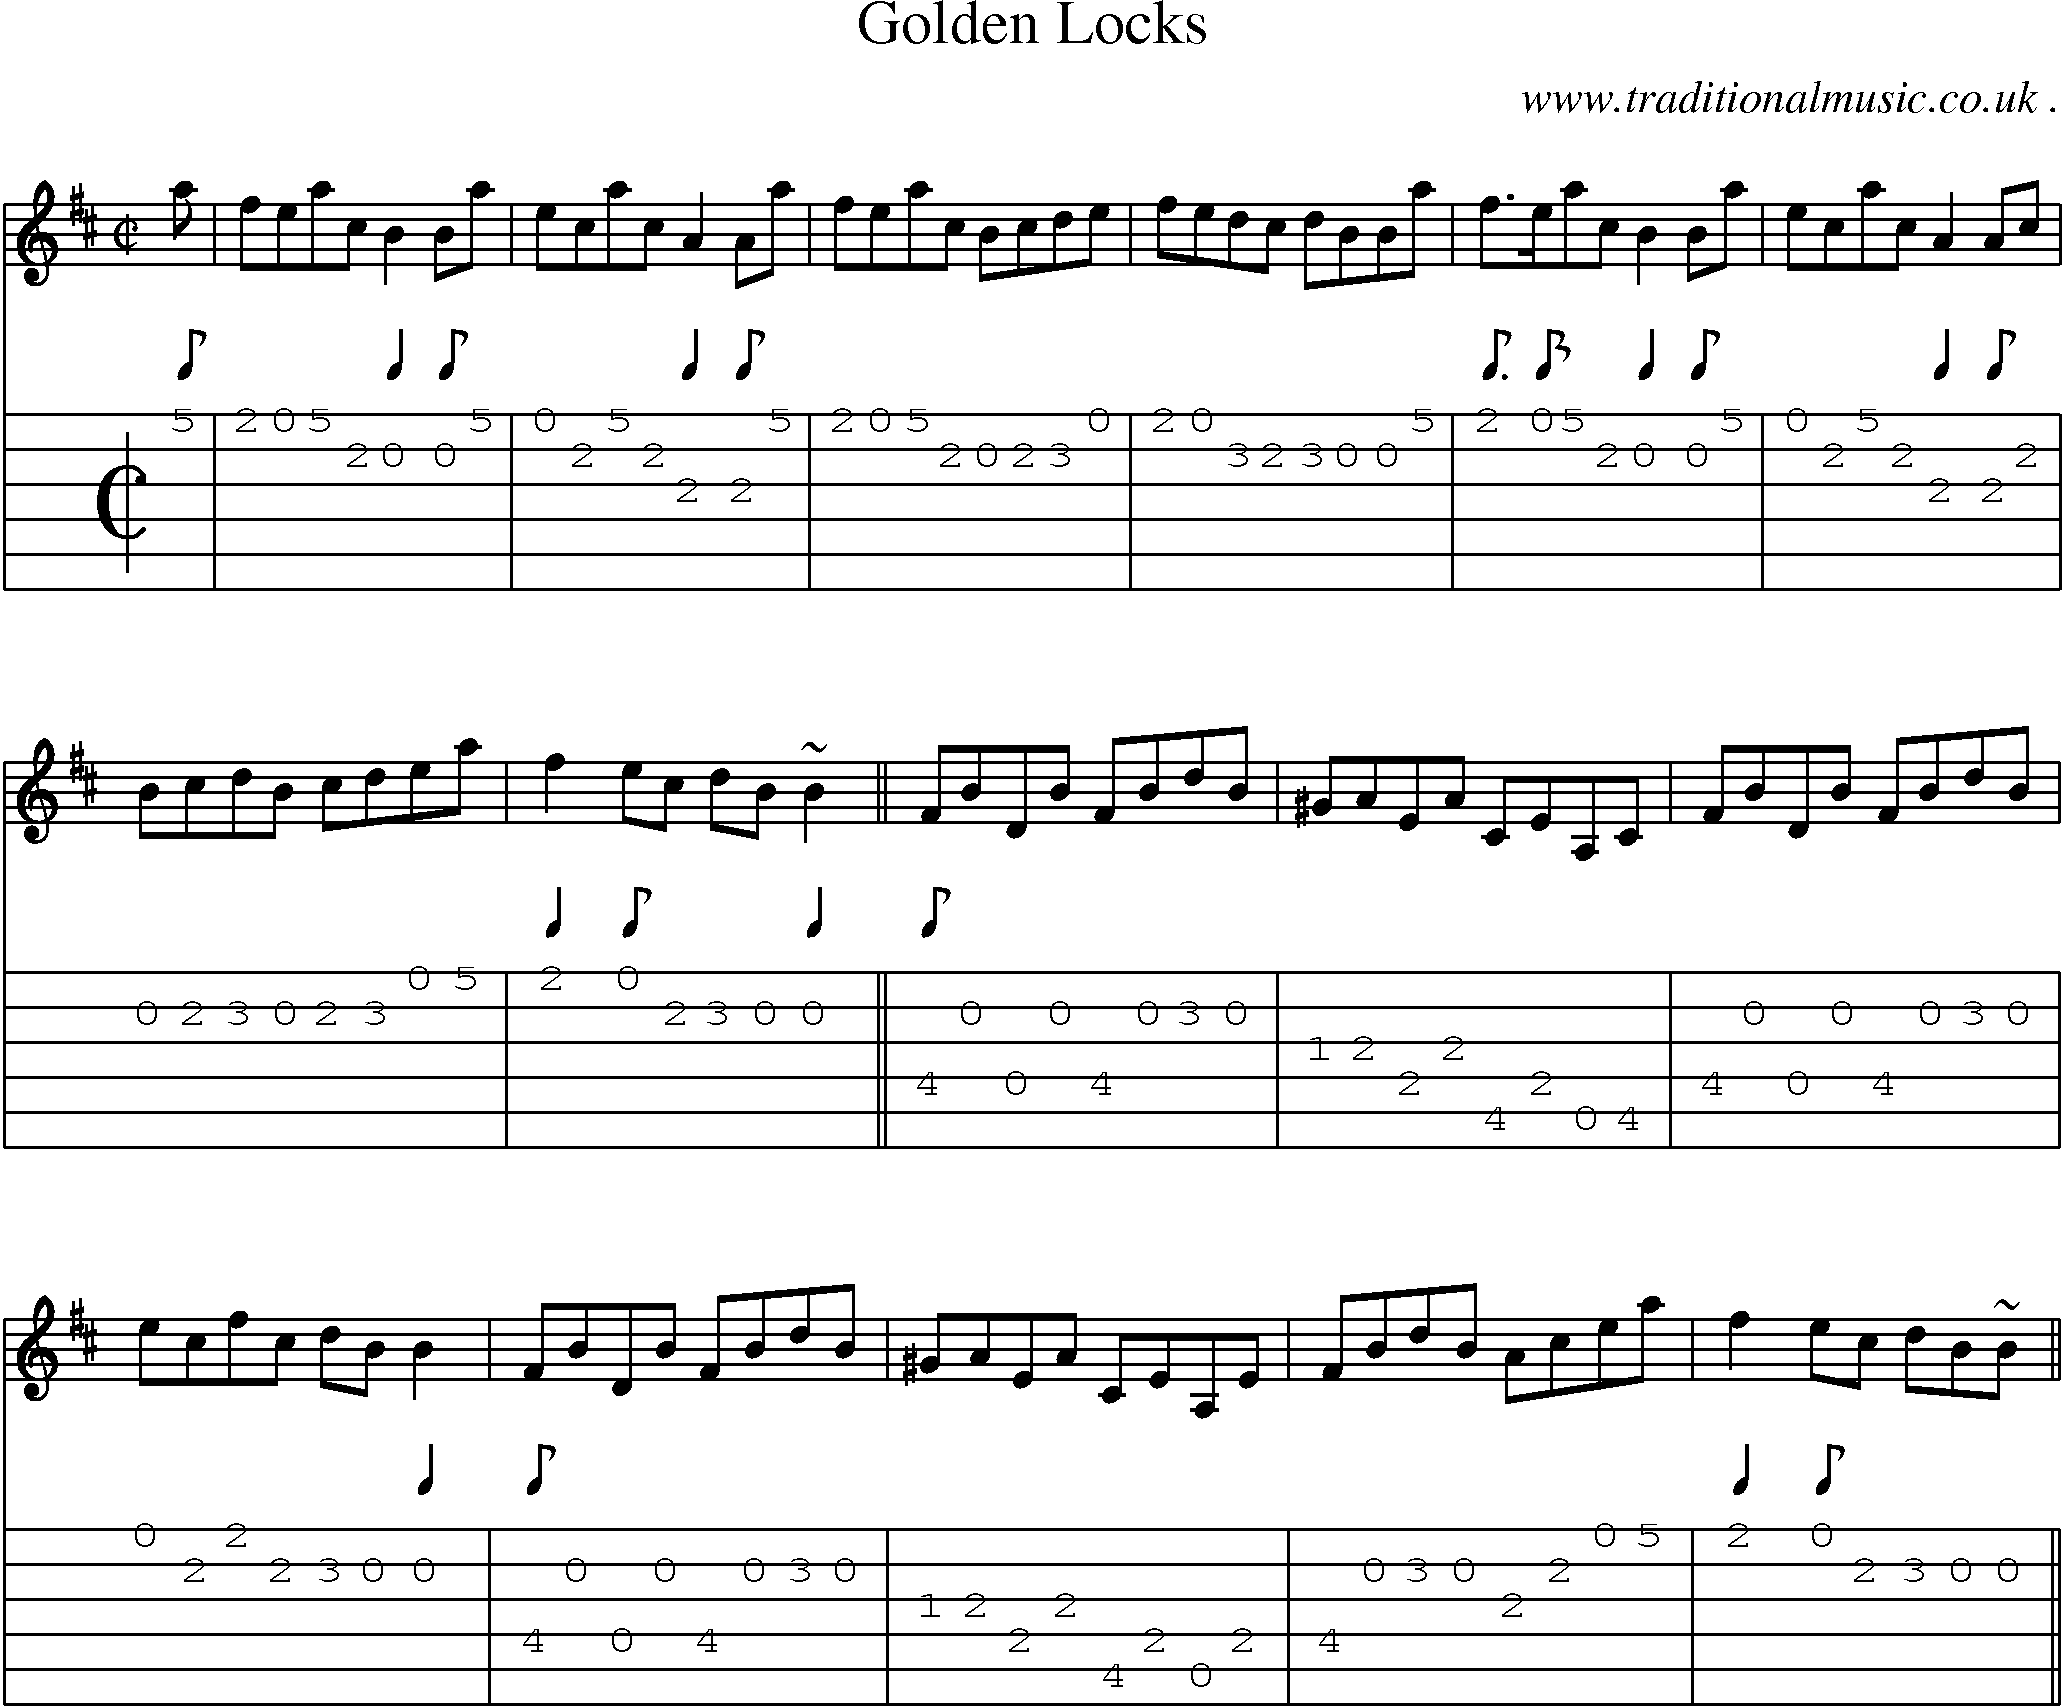 Sheet-music  score, Chords and Guitar Tabs for Golden Locks